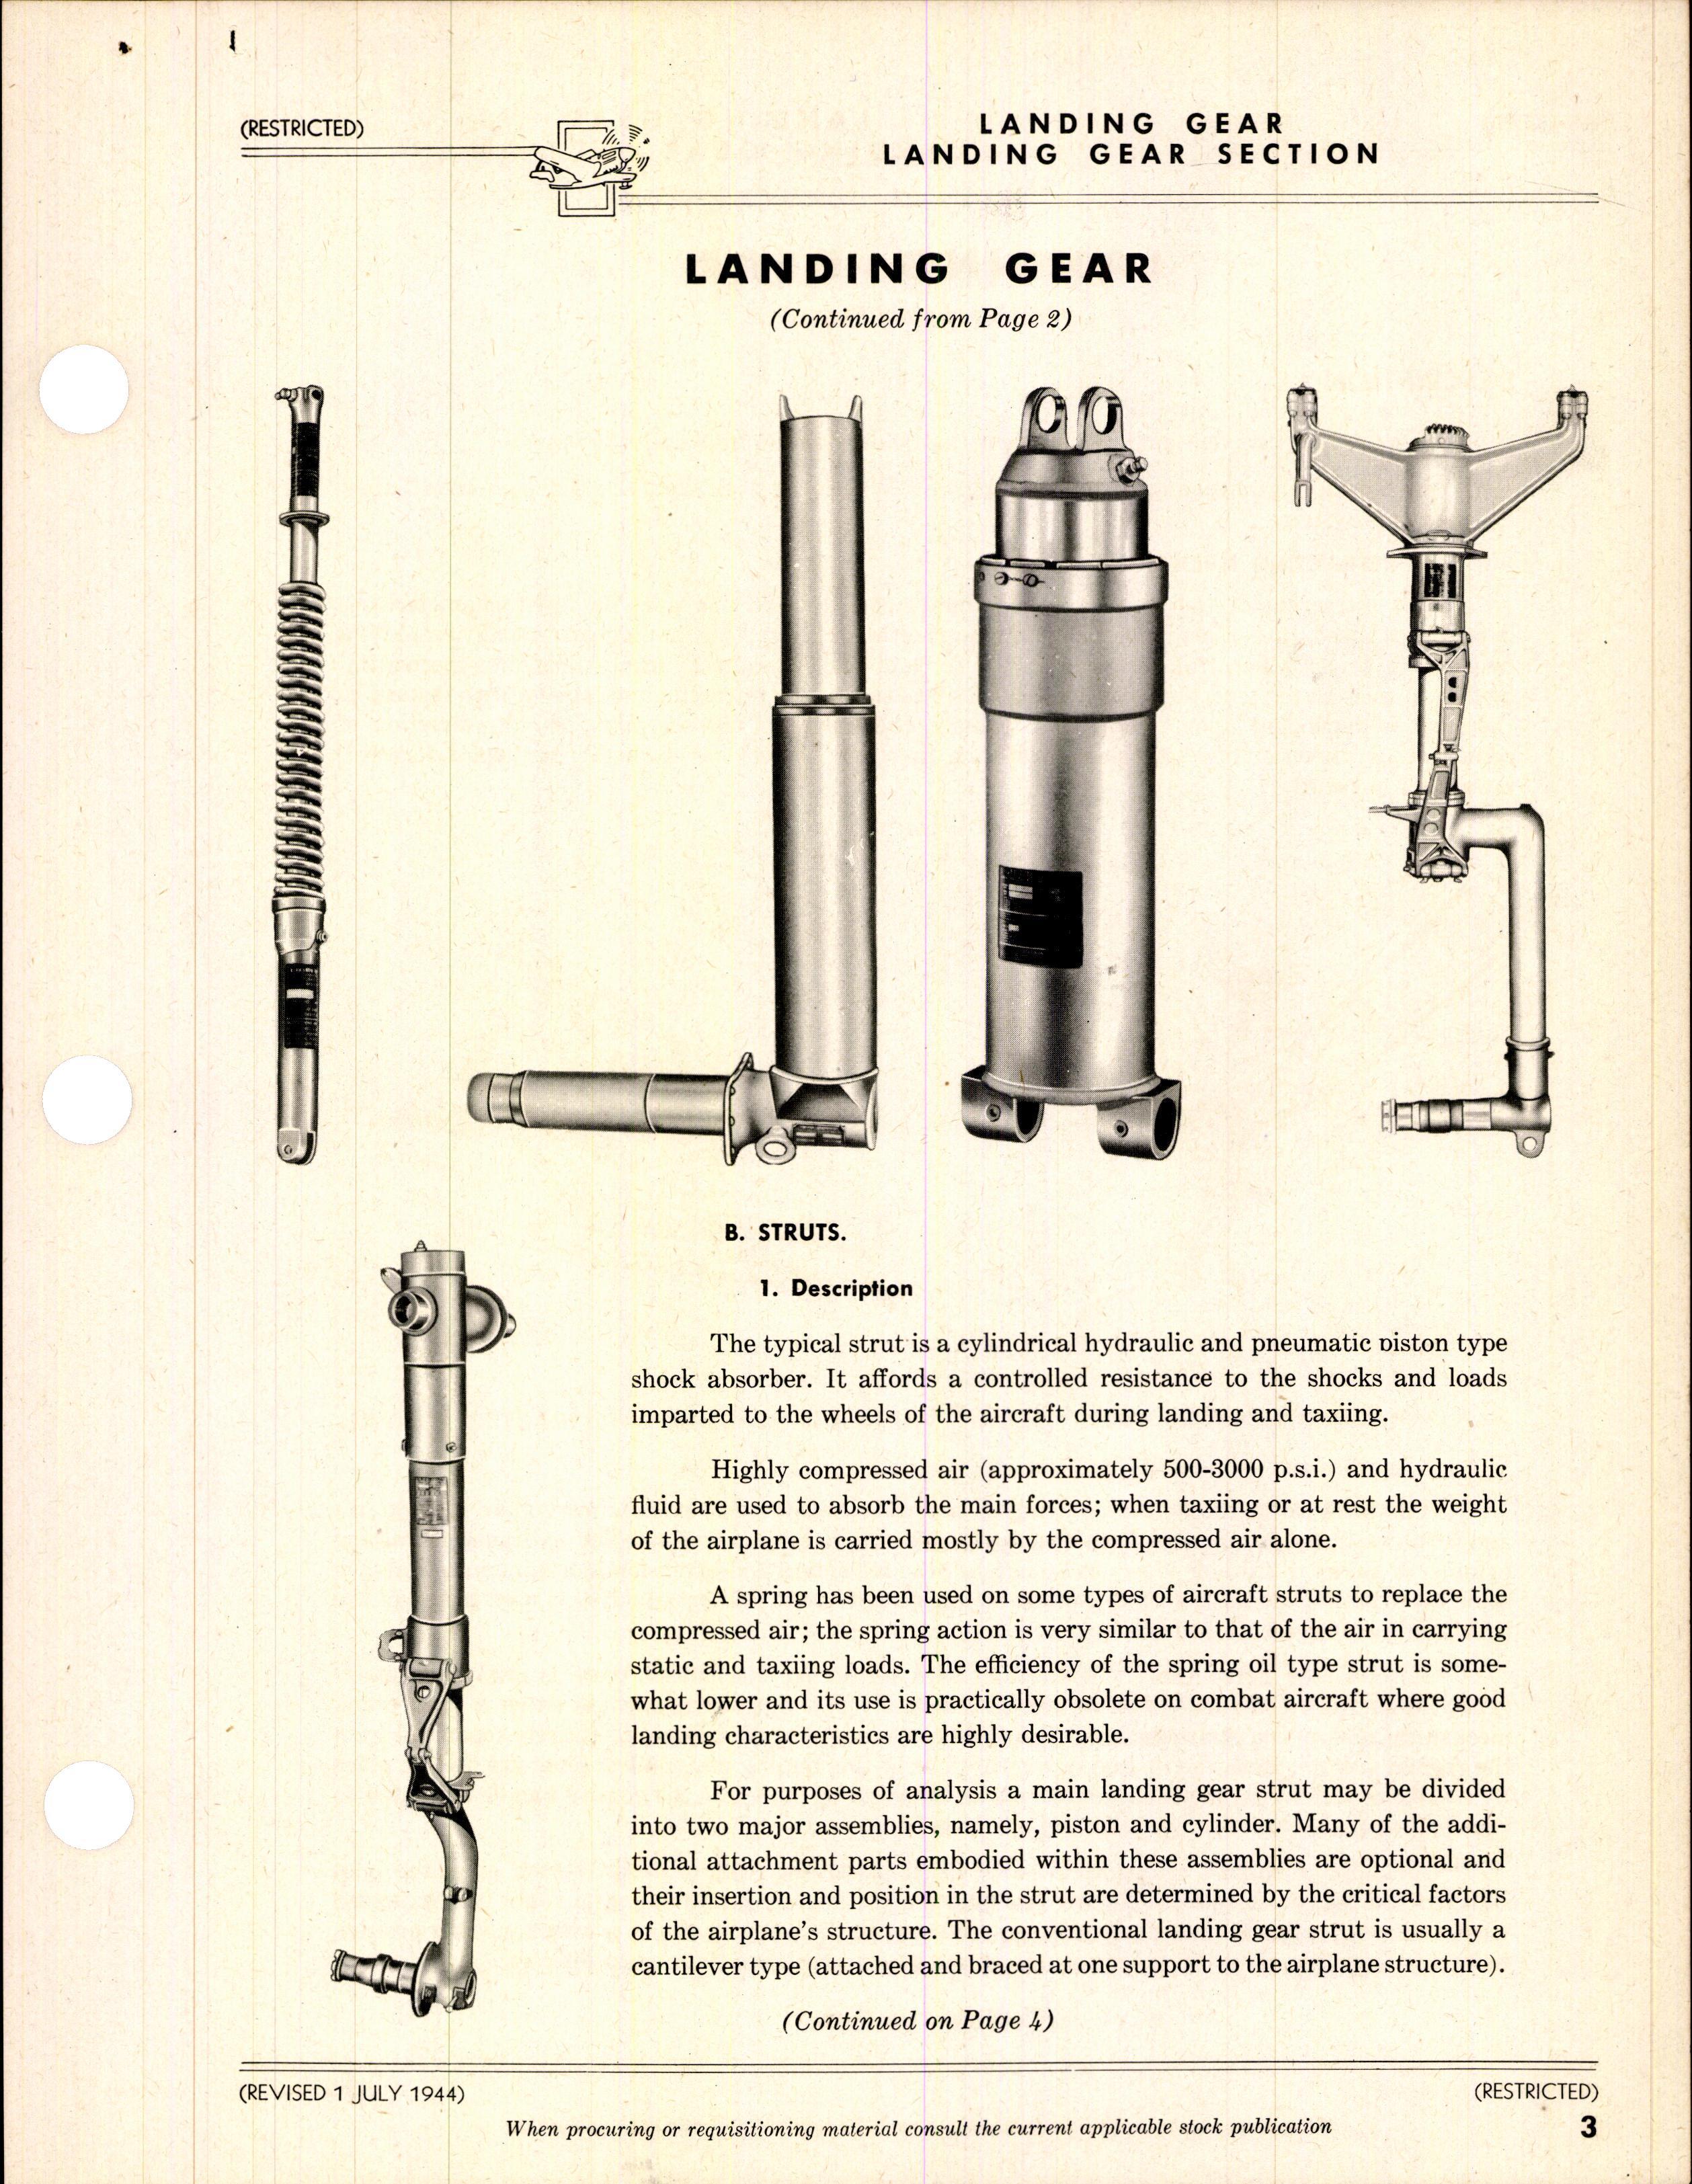 Sample page 45 from AirCorps Library document: Index of Army-Navy Aeronautical Equipment - Landing Gear